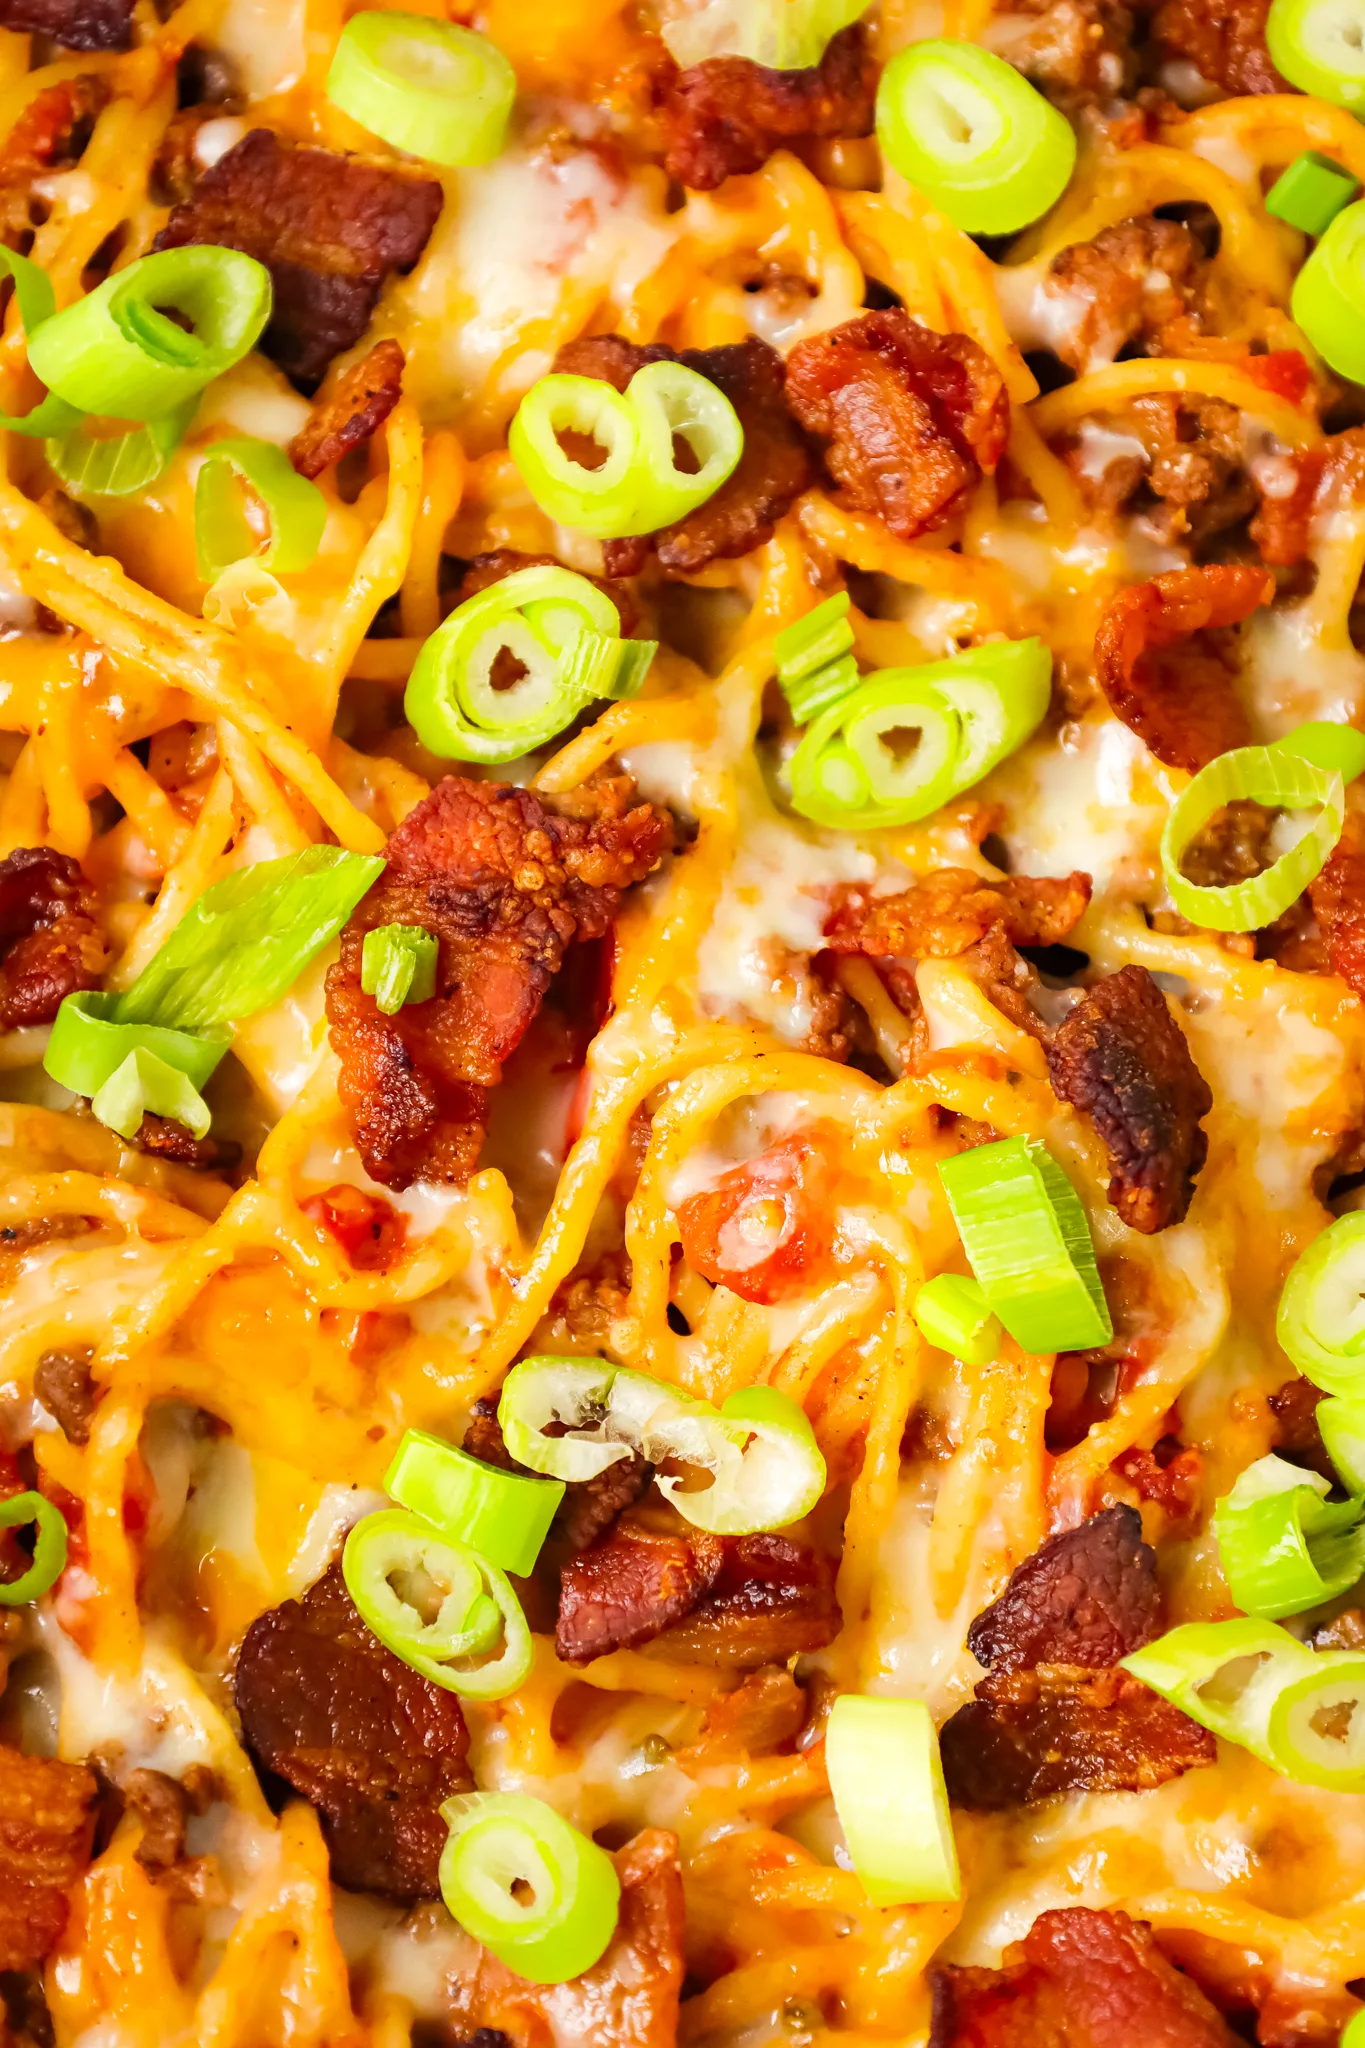 Cowboy Spaghetti is a hearty pasta recipe loaded with bacon, ground beef, Rotel diced tomatoes and green chilies, tomato sauce, bbq sauce, shredded cheese and chopped green onions.